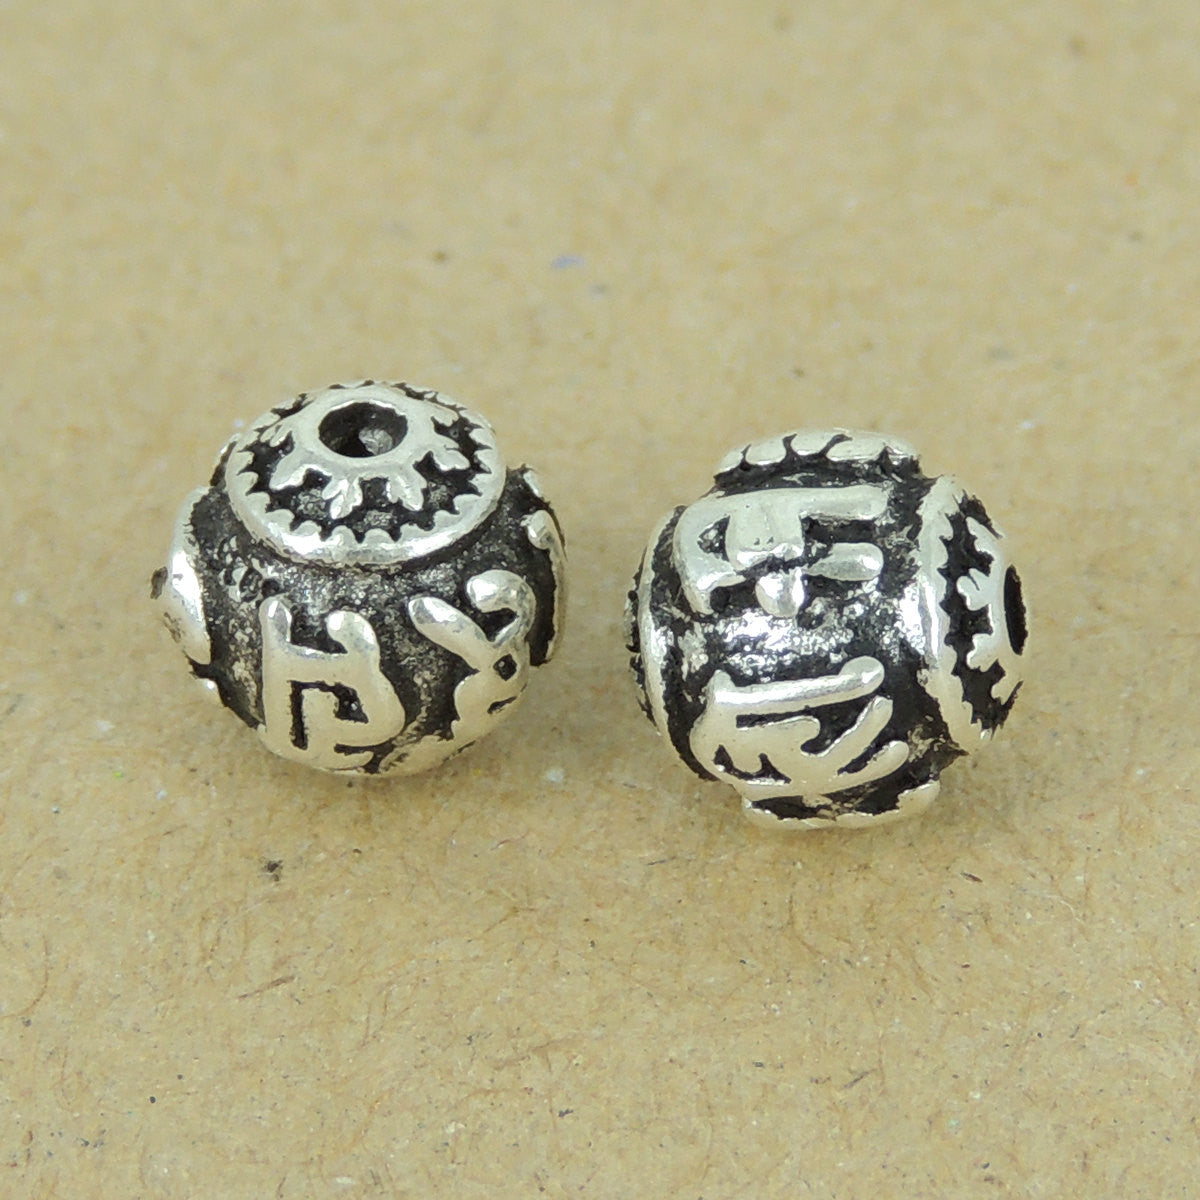 2 PCS Small OM Meditation Beads - S925 Sterling Silver WSP408X2